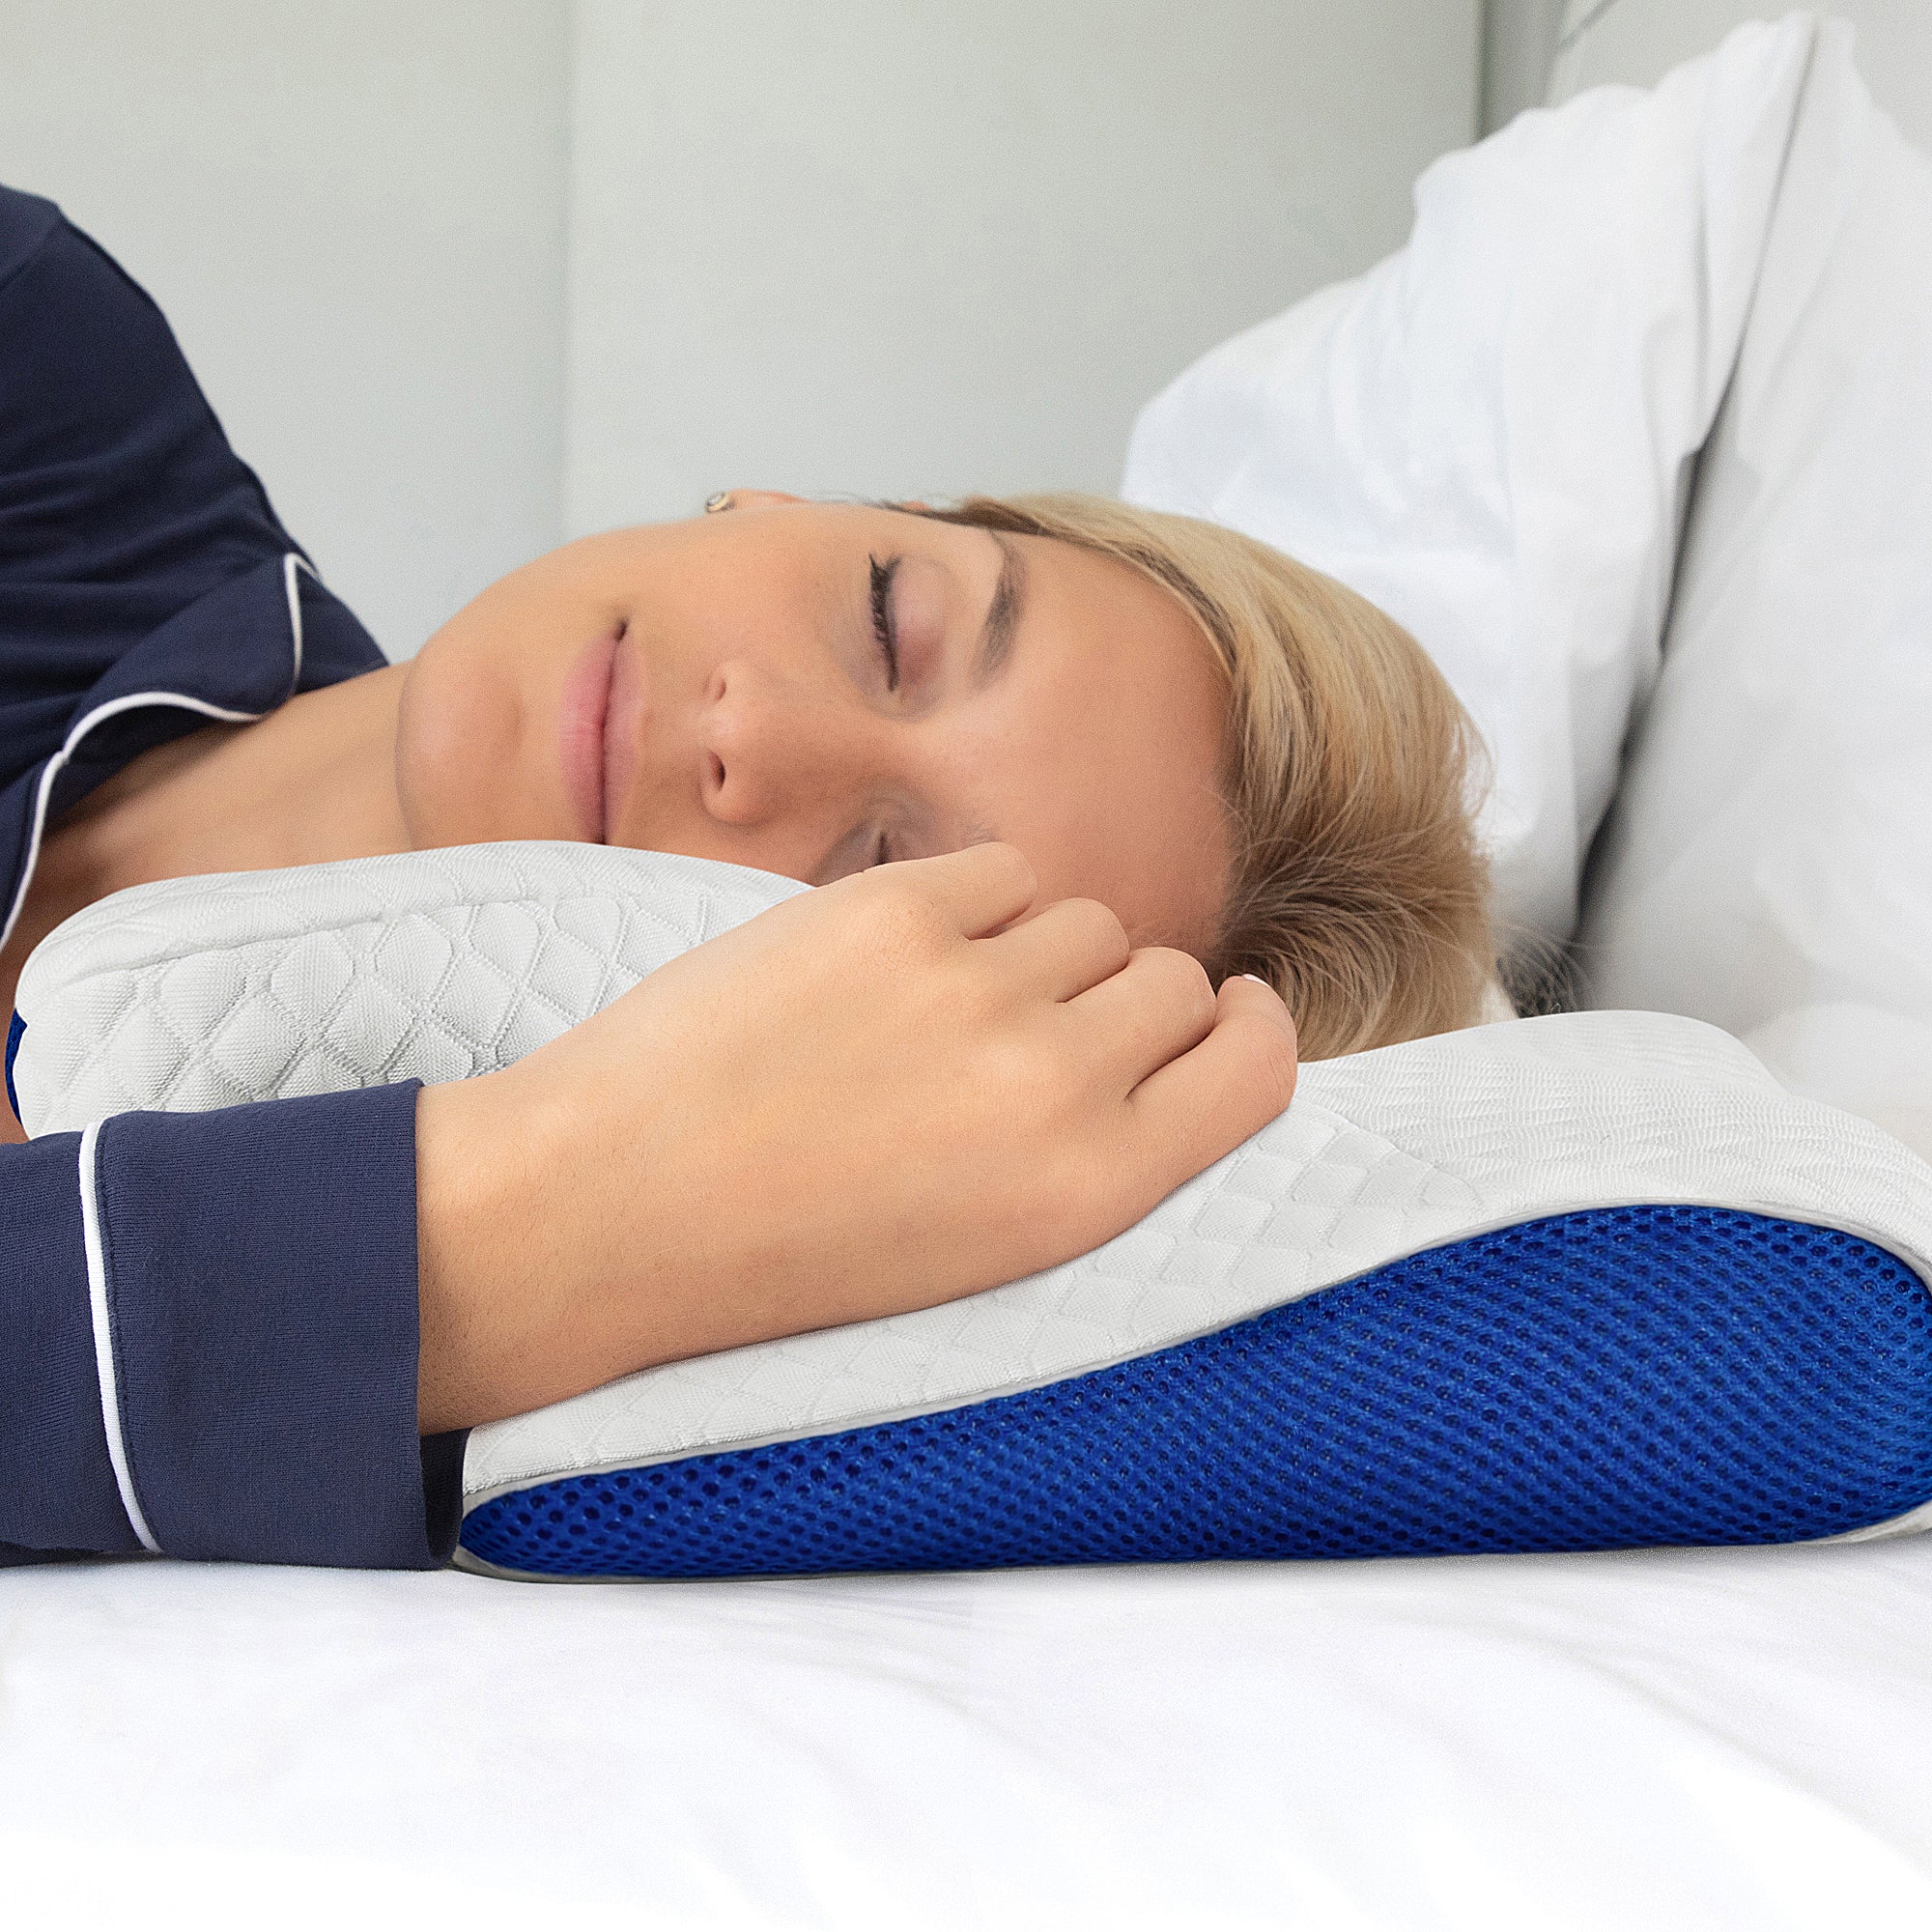 Cervical Neck Pillows for Pain Relief Sleeping, High-Density